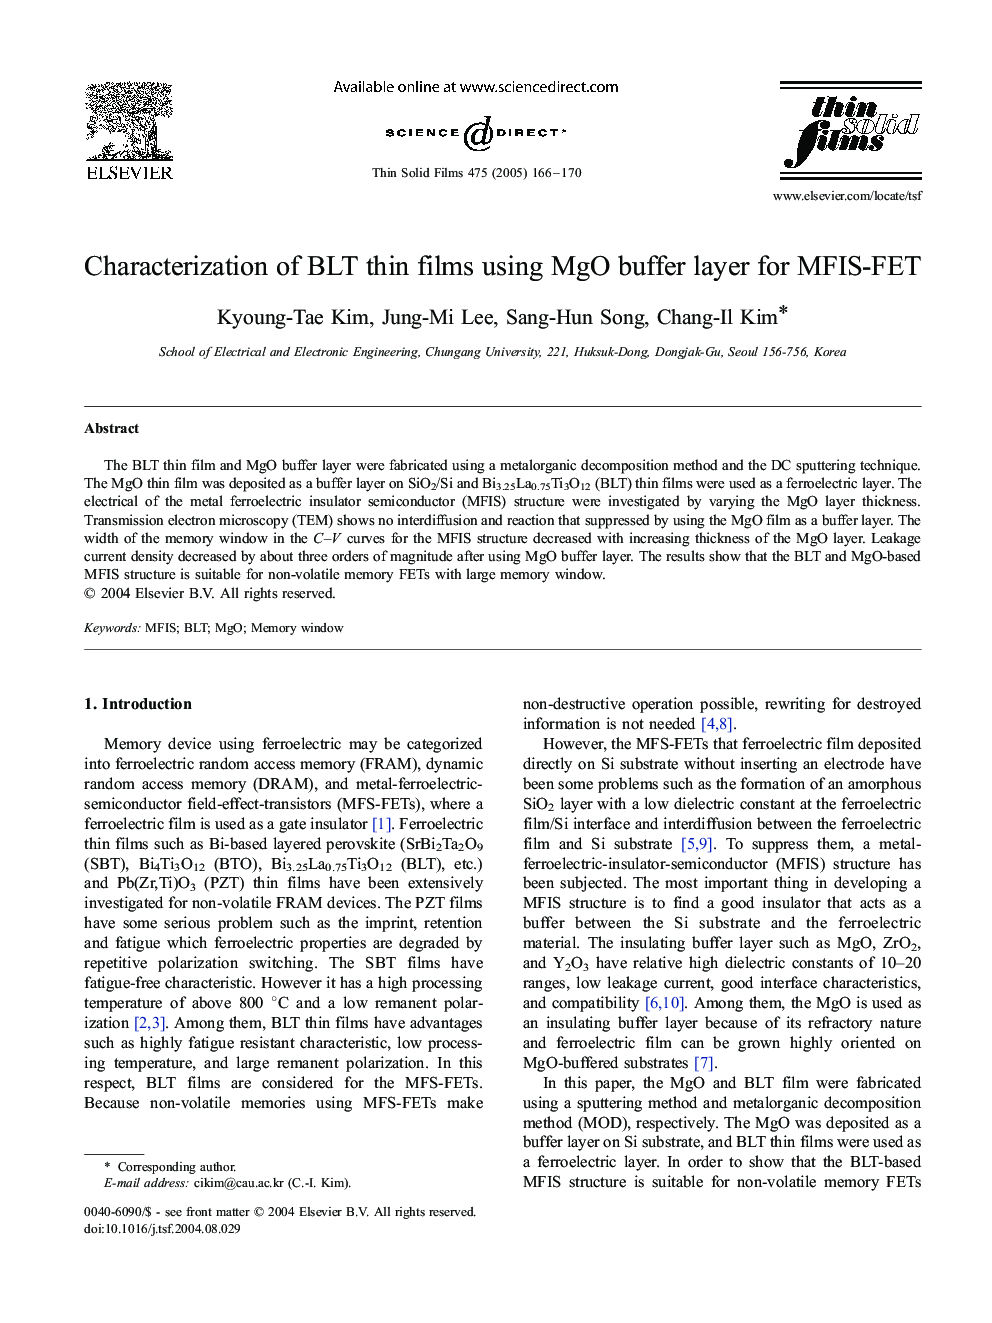 Characterization of BLT thin films using MgO buffer layer for MFIS-FET